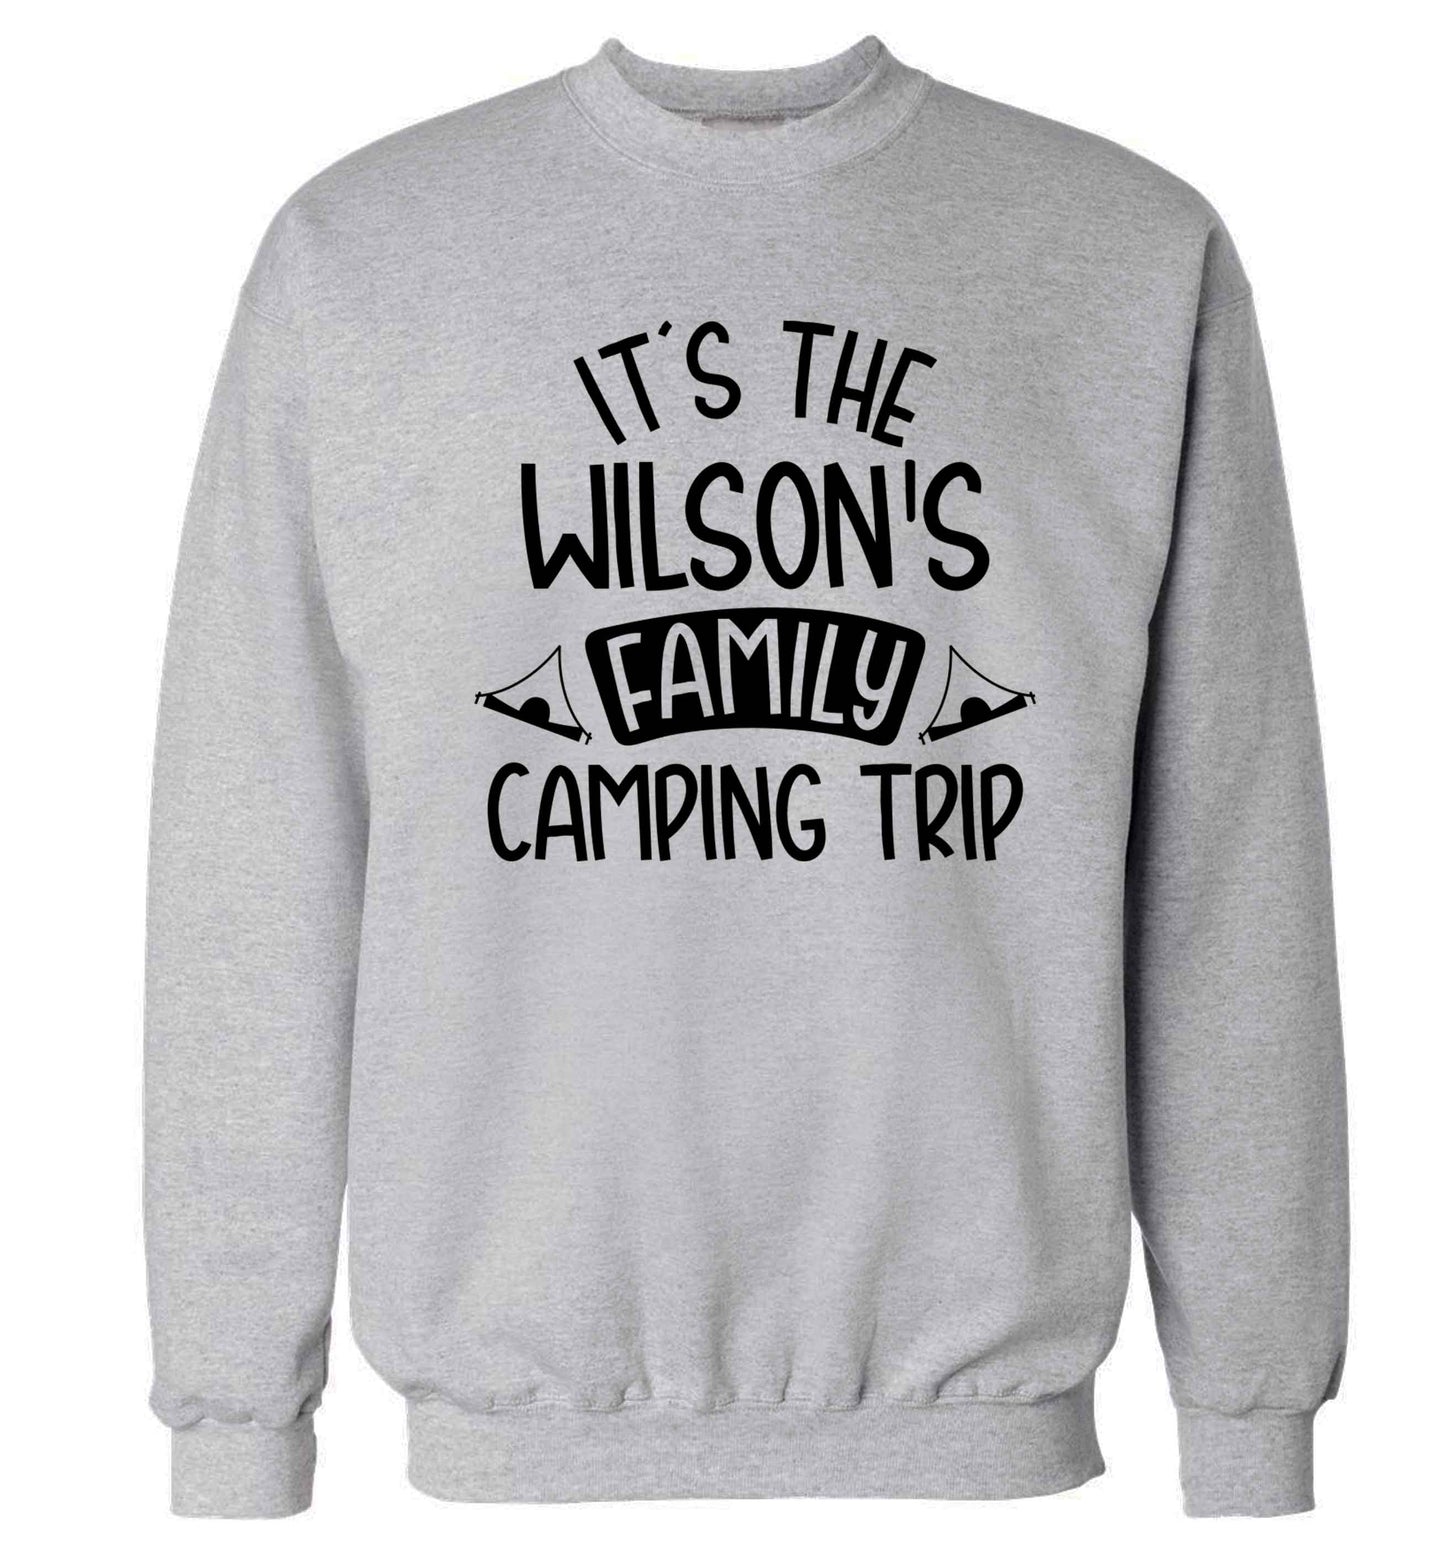 It's the Wilson's family camping trip personalised Adult's unisex grey Sweater 2XL